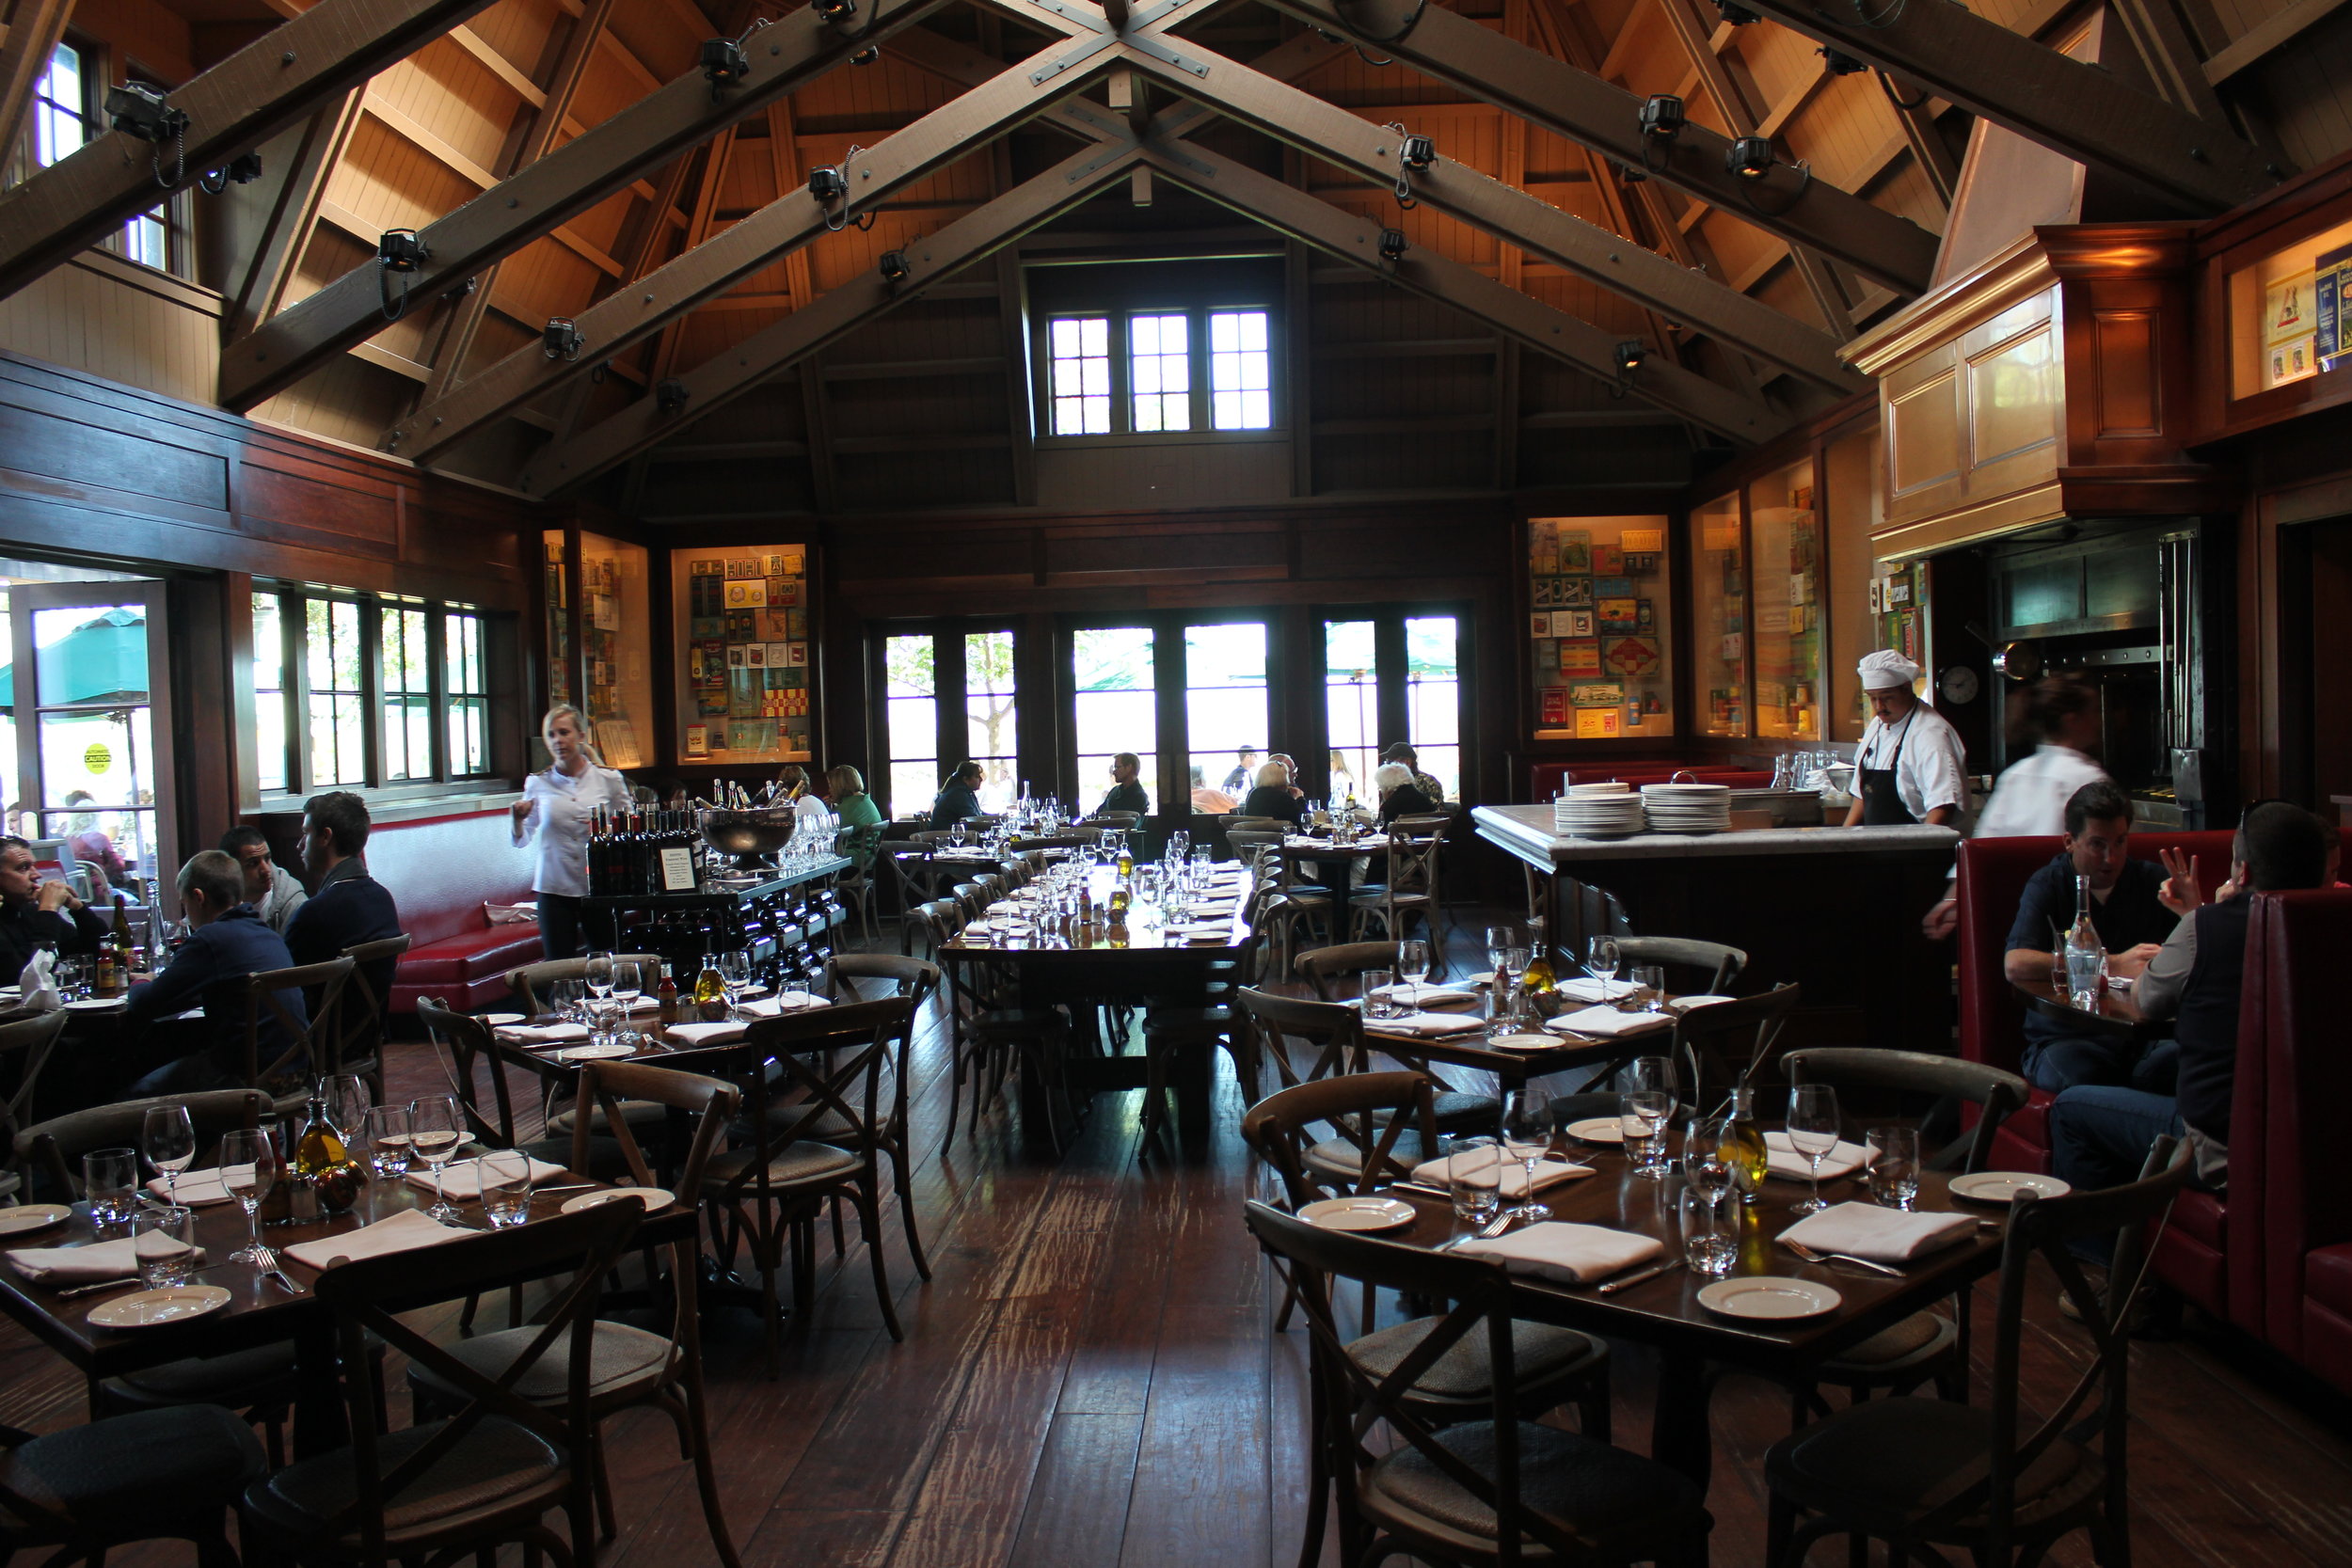 Dining room at Coppola Winery Restaurant Rustic